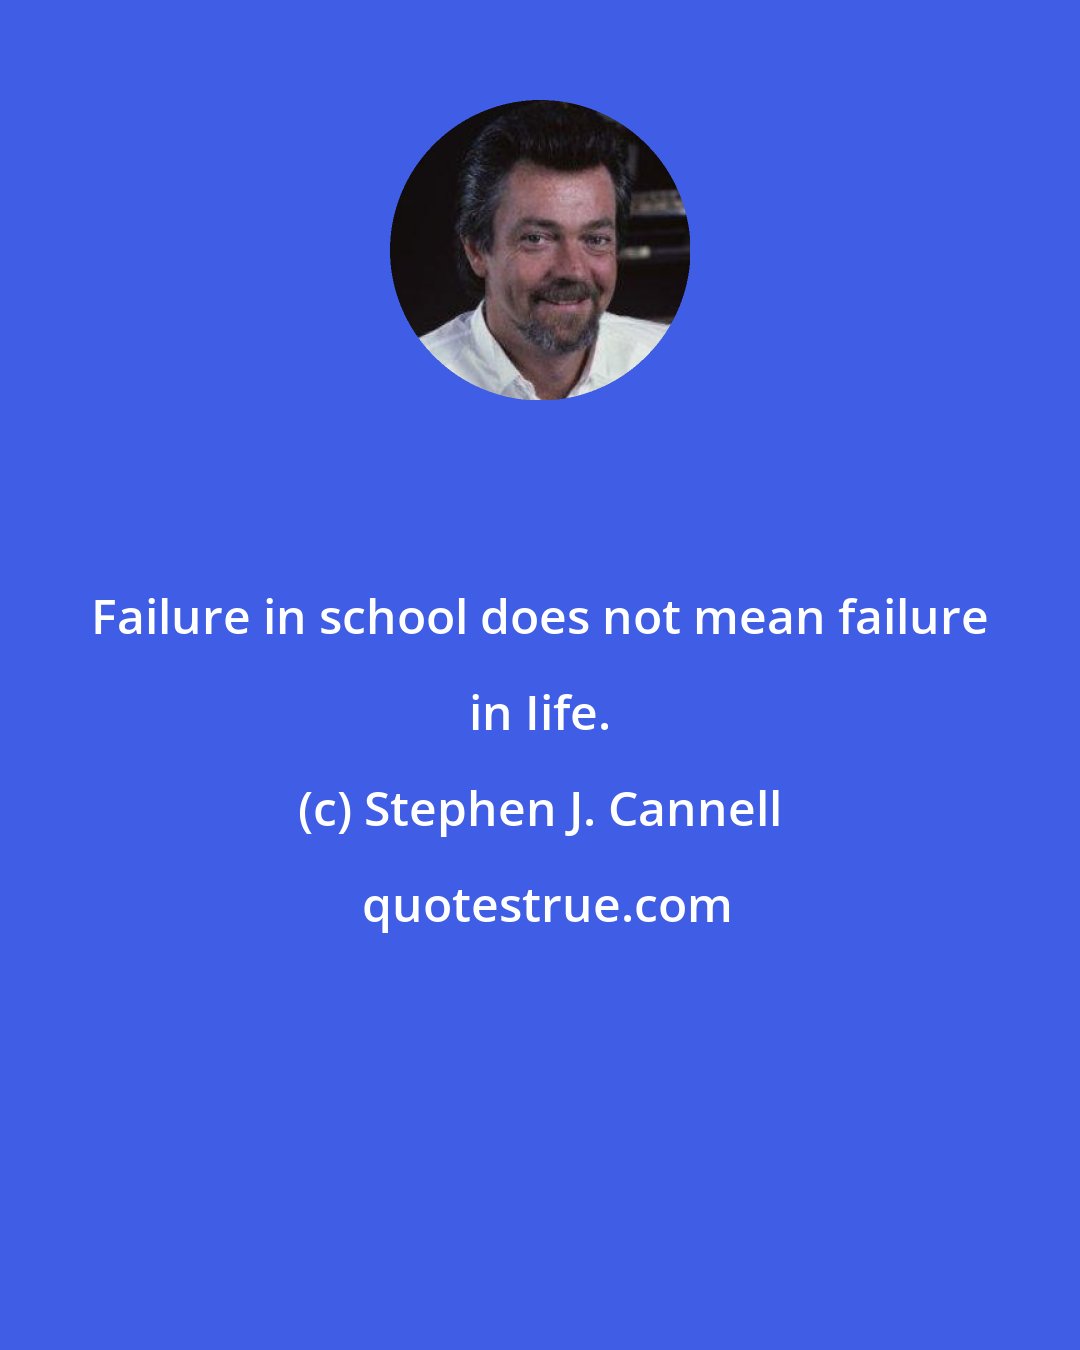 Stephen J. Cannell: Failure in school does not mean failure in Iife.